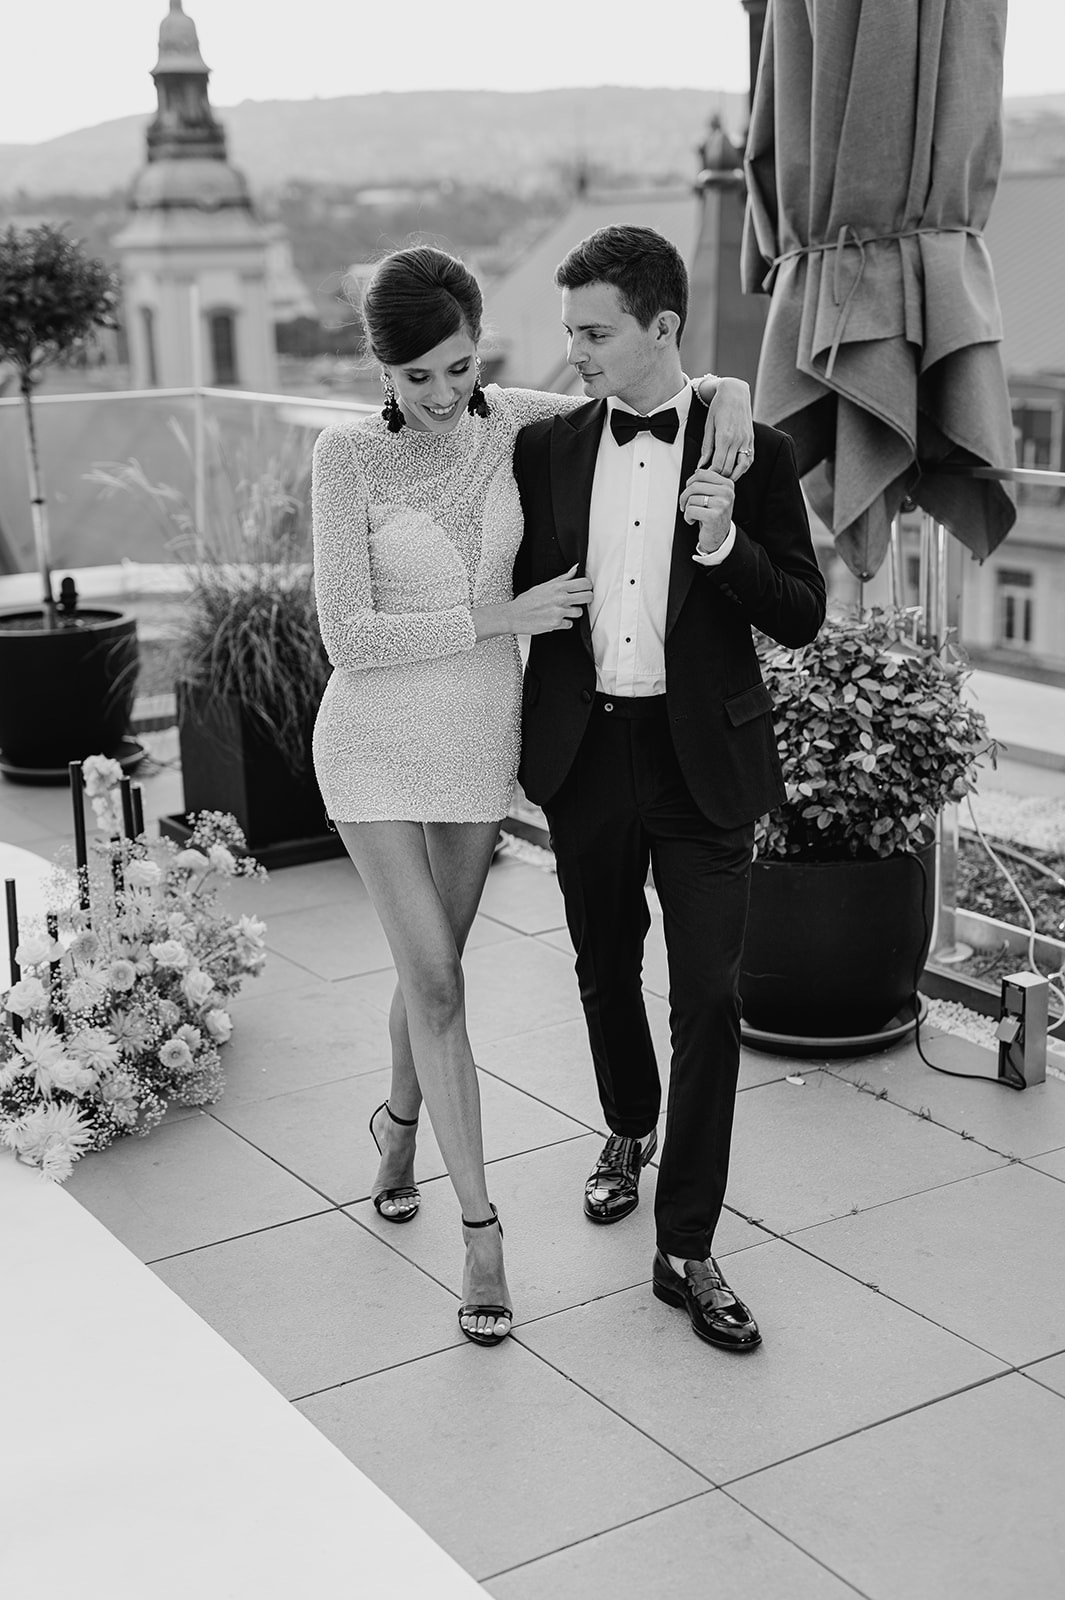 Elope in style above the sky, photo: The Wedding Fox